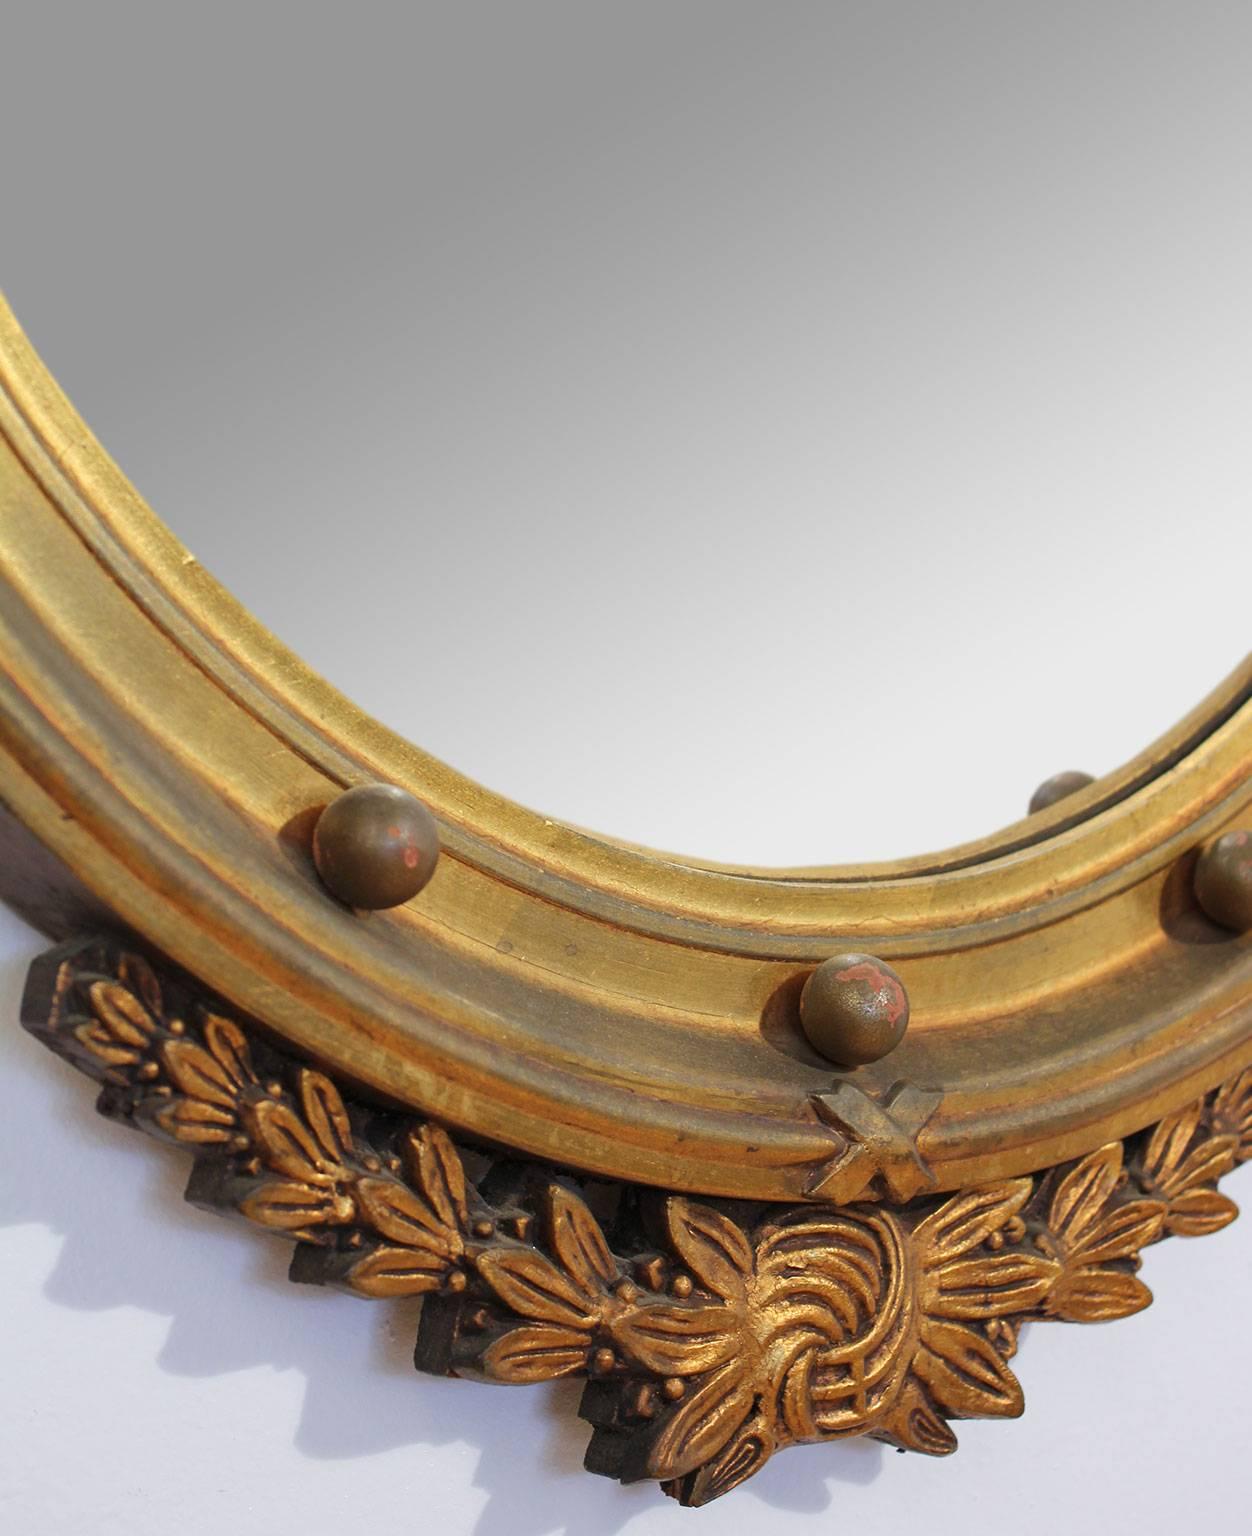 19th Century Antique Federal Eagle Gold Giltwood Frame with Convex Mirror